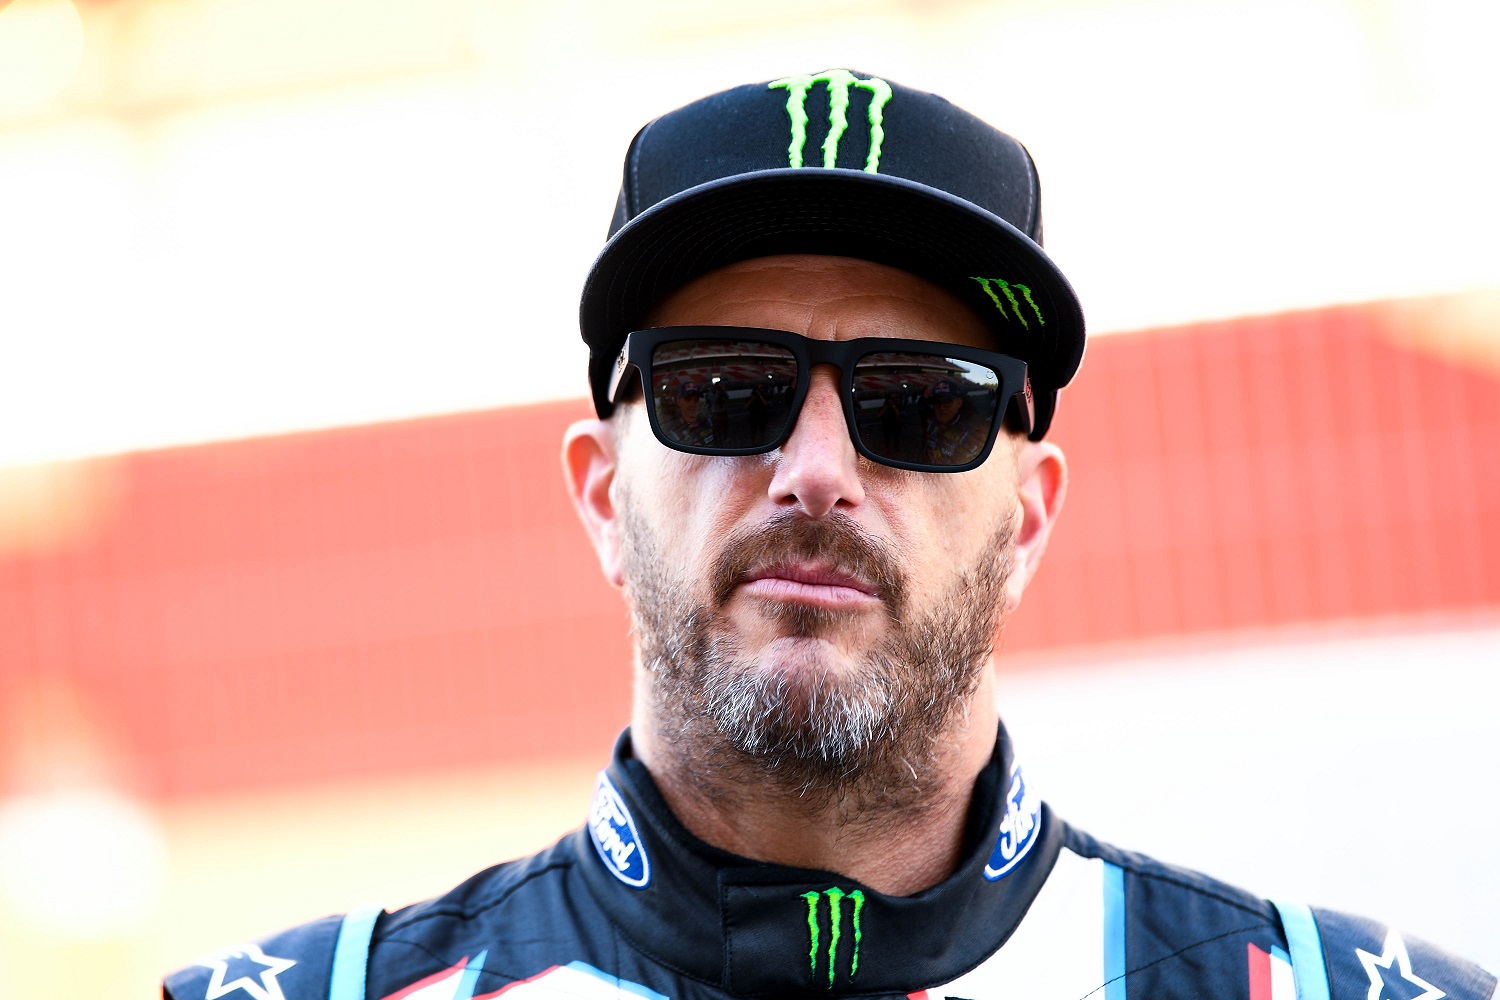 Ken Block of Hoonigan Racing looks on during the launch event of the FIA World Rallycross Championship at Circuit de Catalunya in Barcelona on March 30, 2017. |  David Ramos/Getty Images